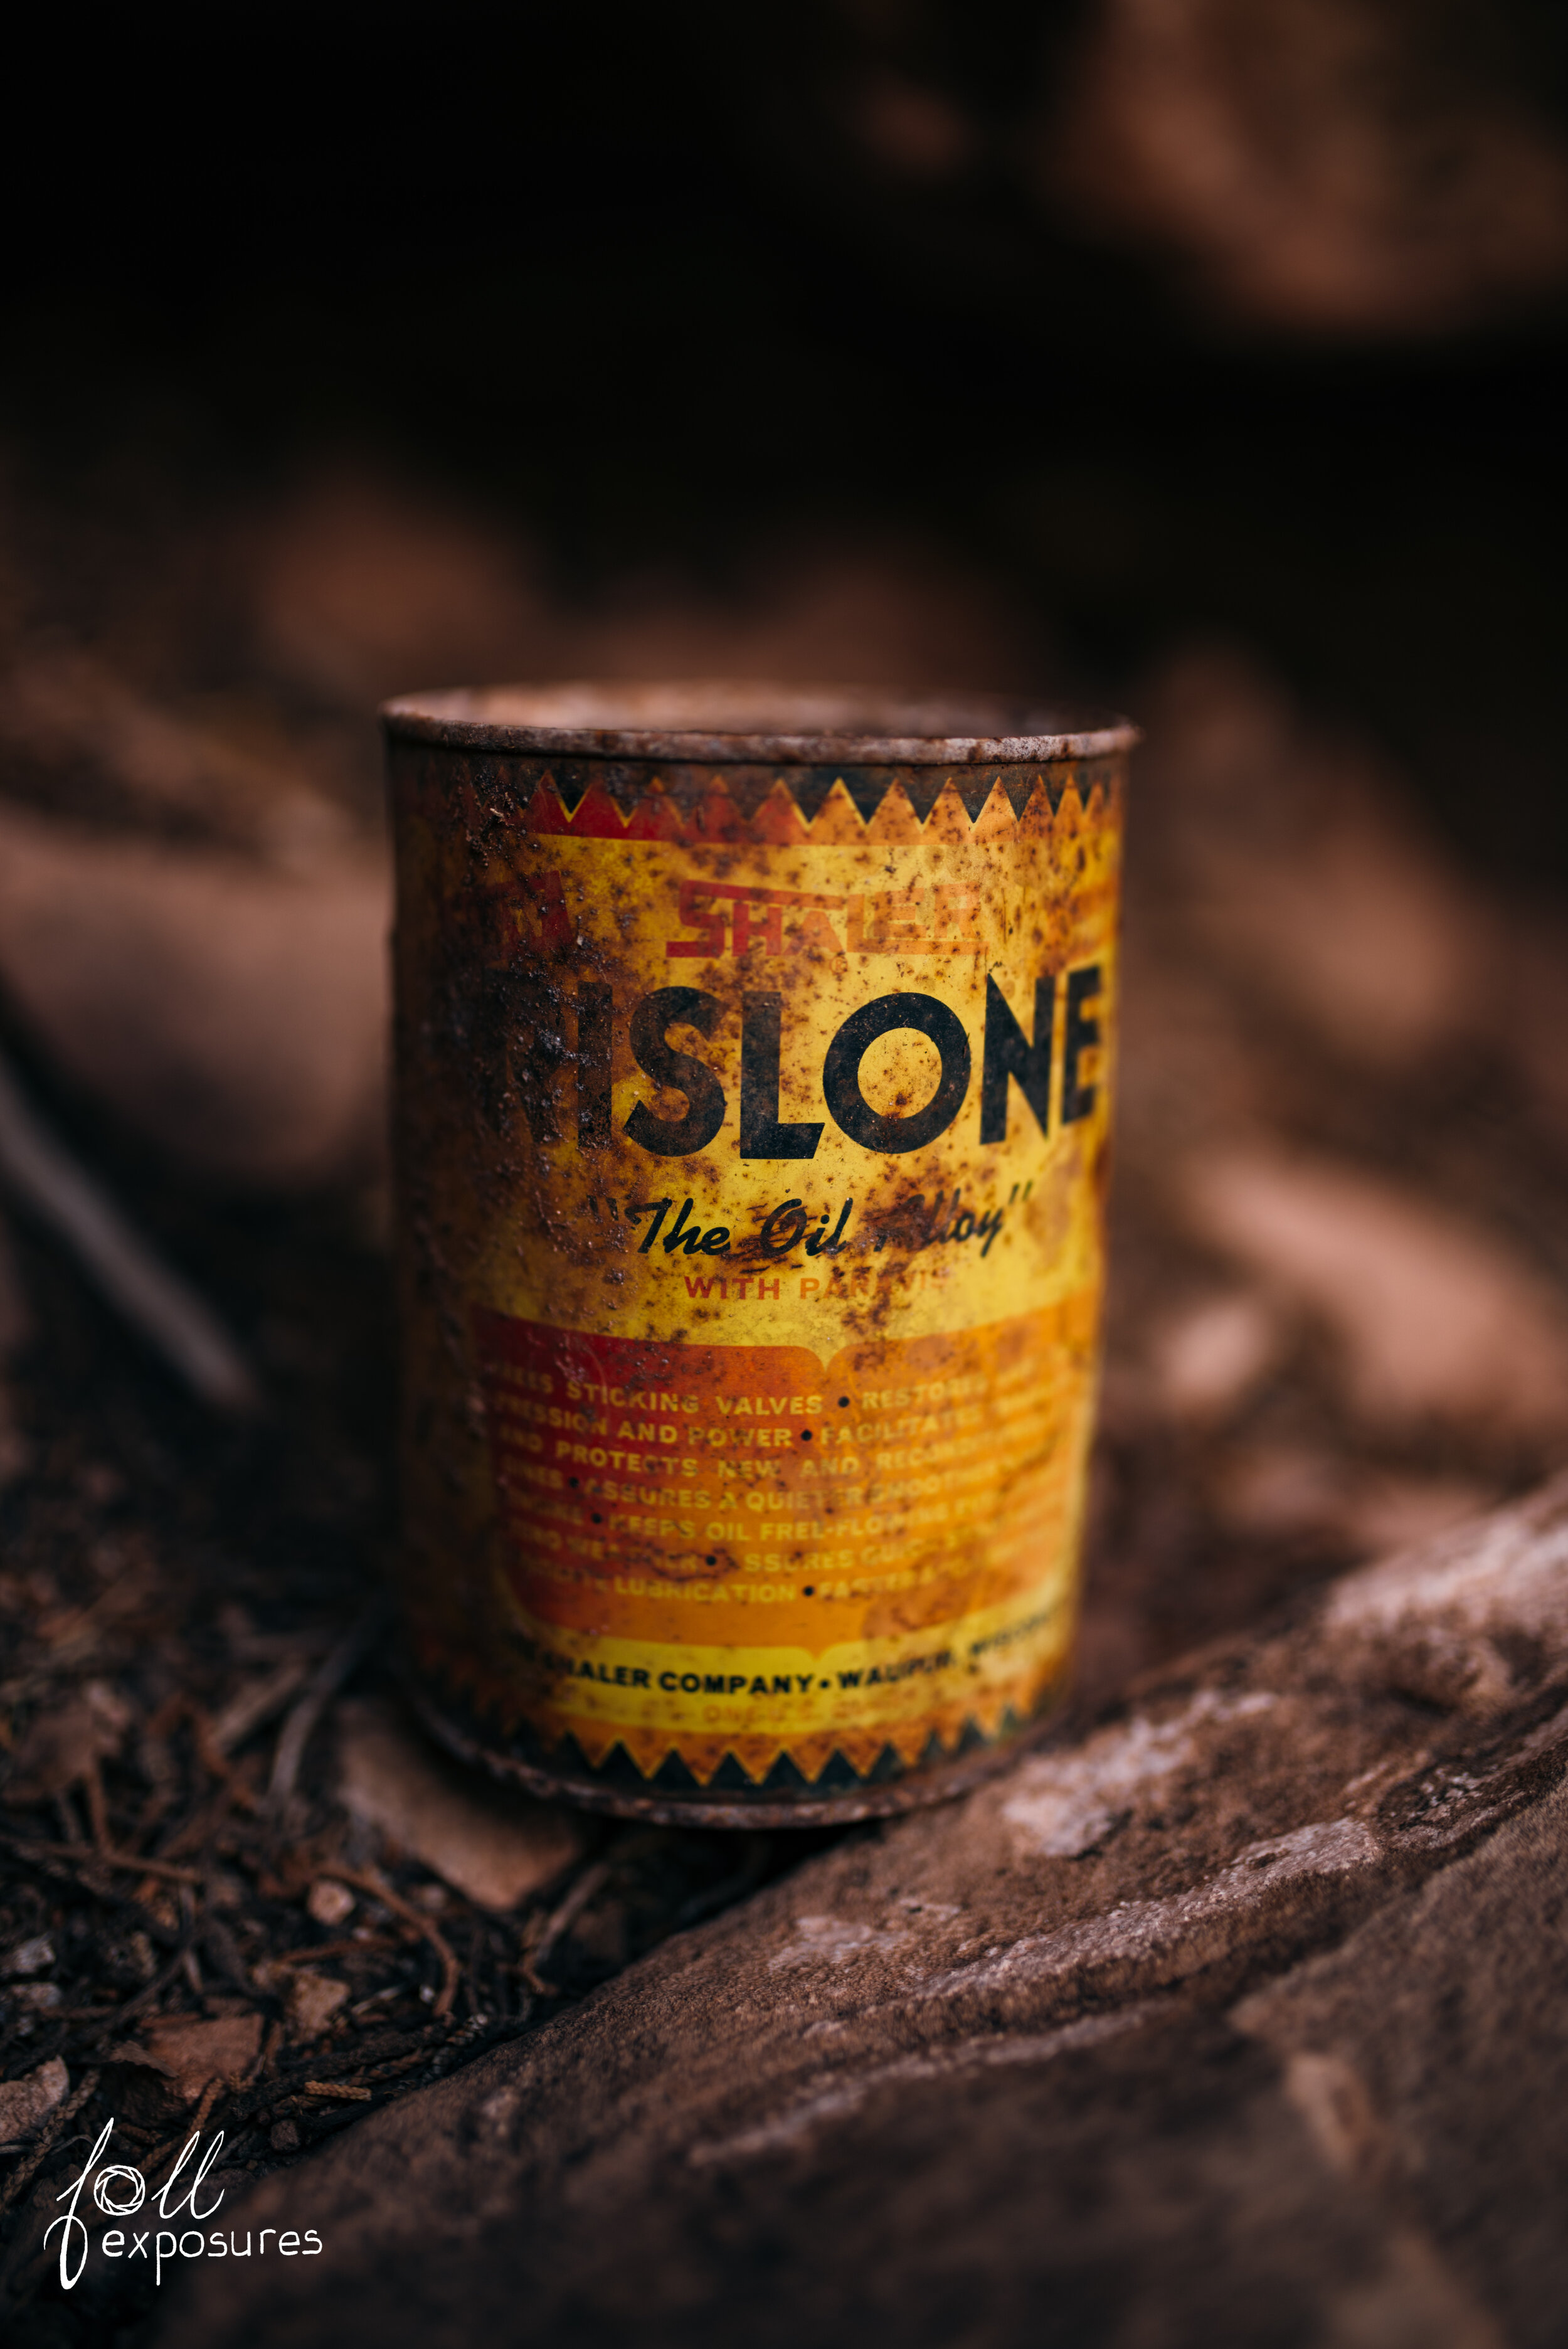  Bet you didn’t know motor oil used to come in cans too, did ya? 